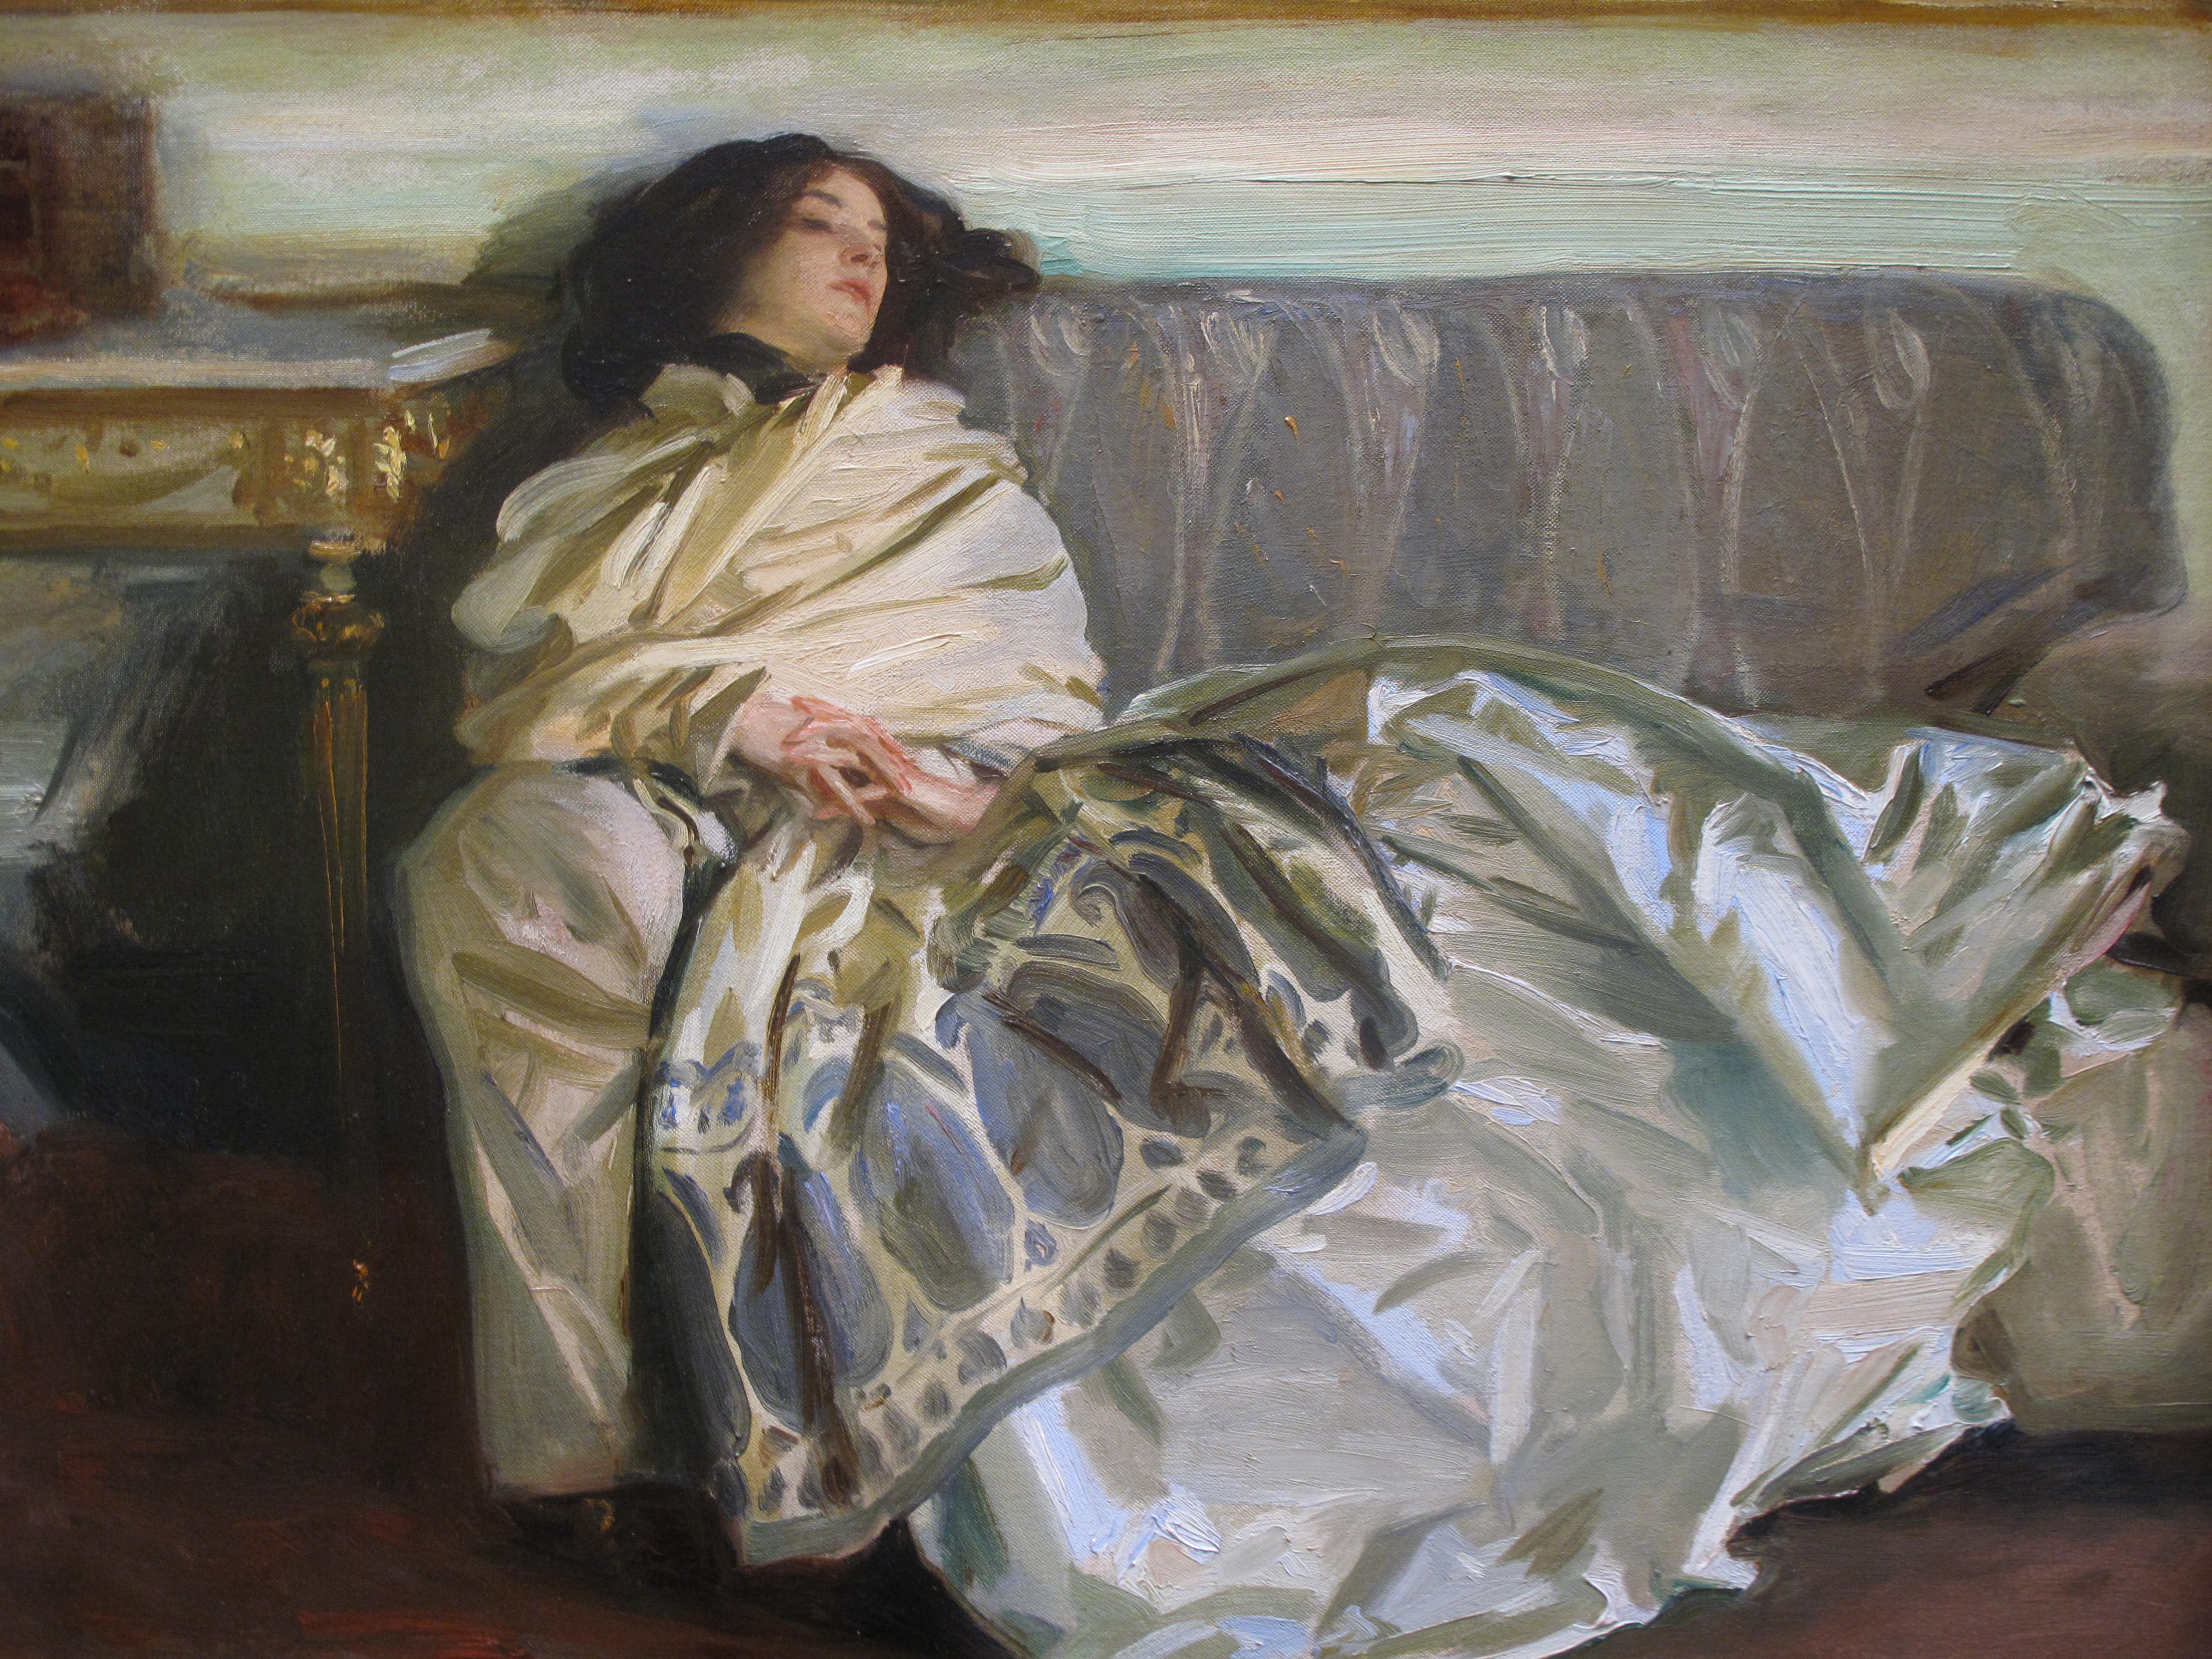 Repose - Singer Sargent - National Gallery of Art